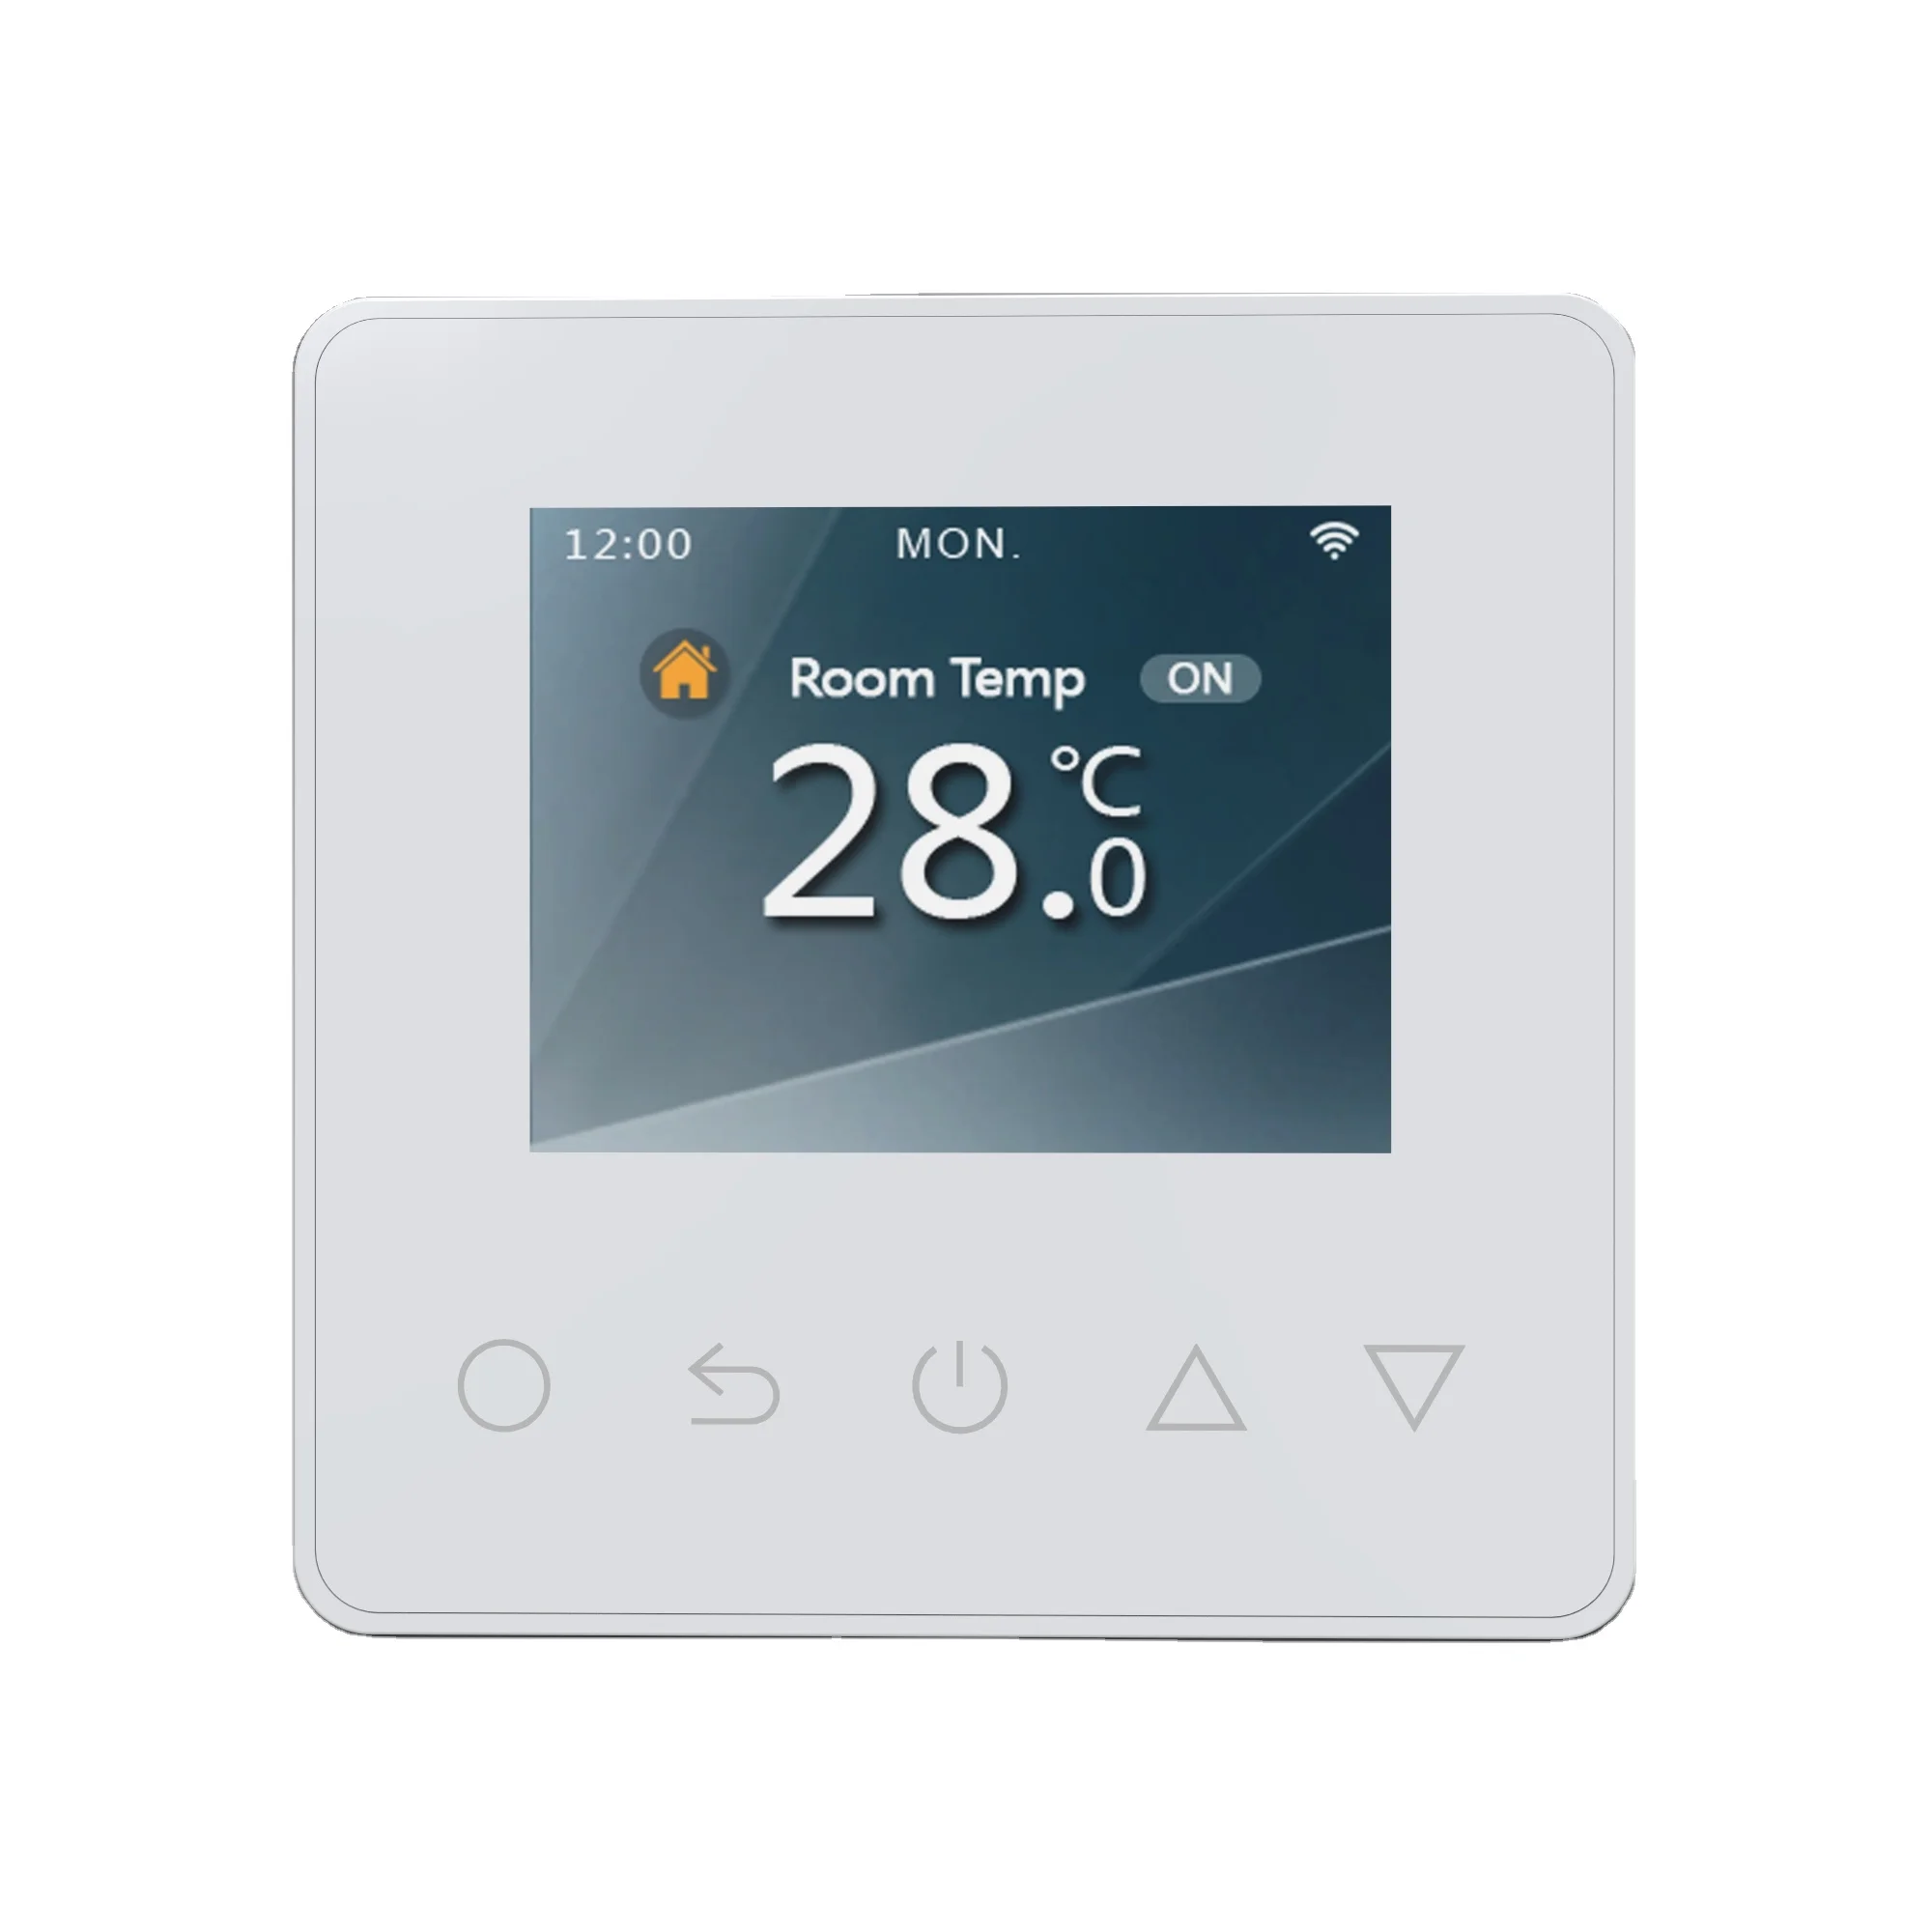 Wifi floor heating room thermostat can compatible